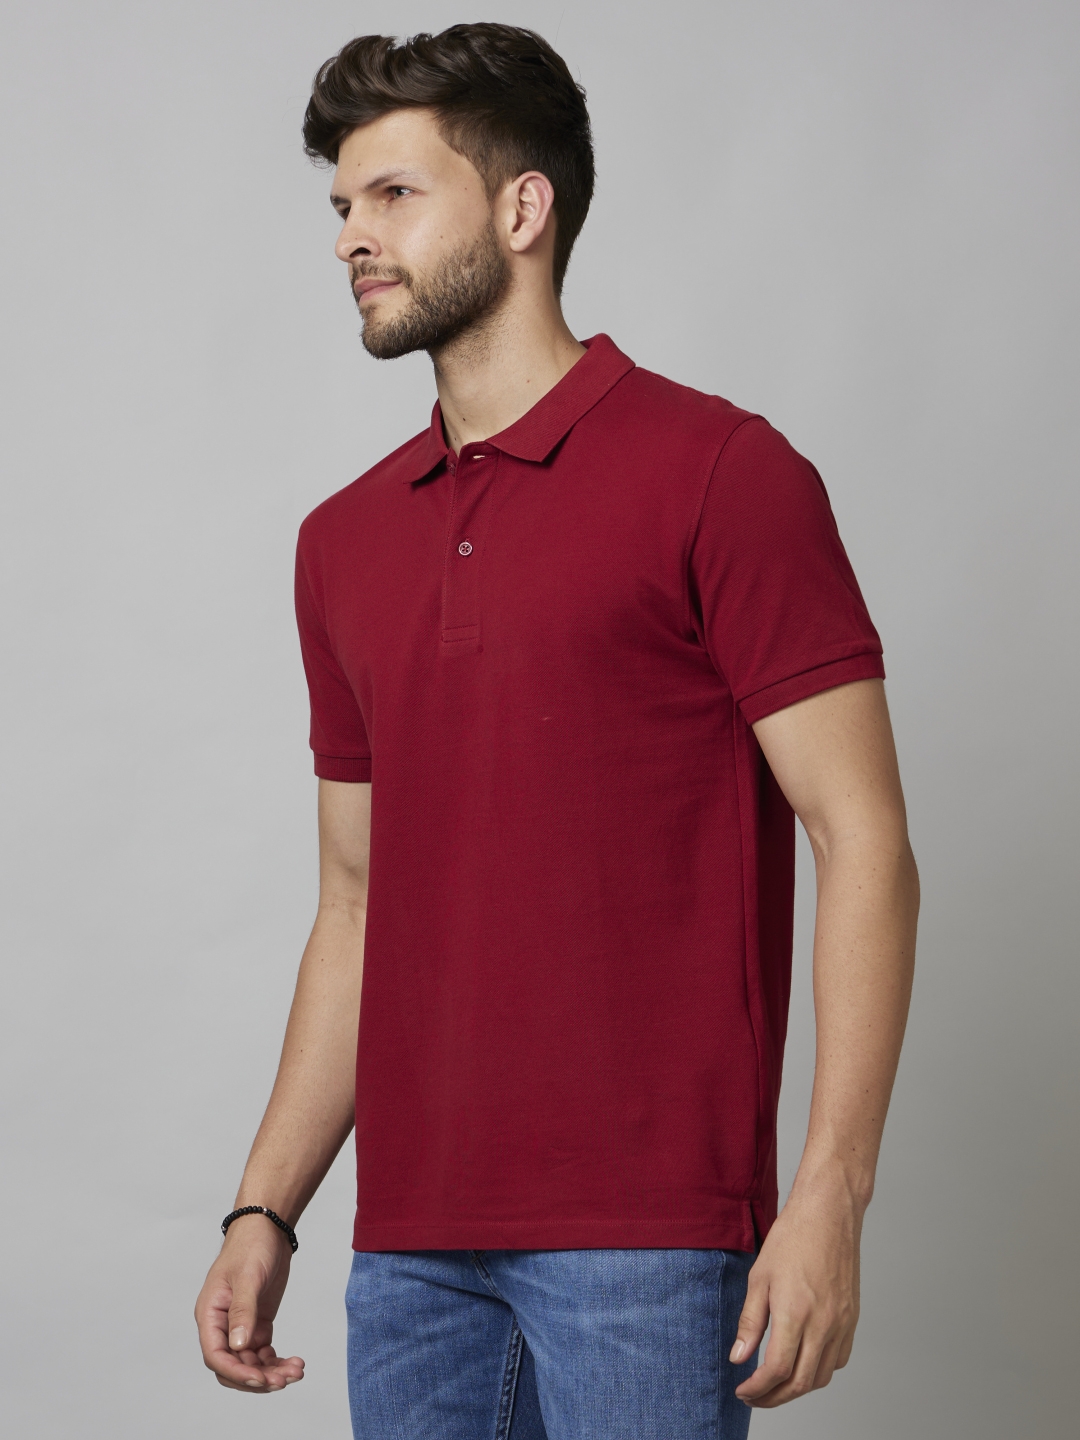 Men's Red Solid Polos